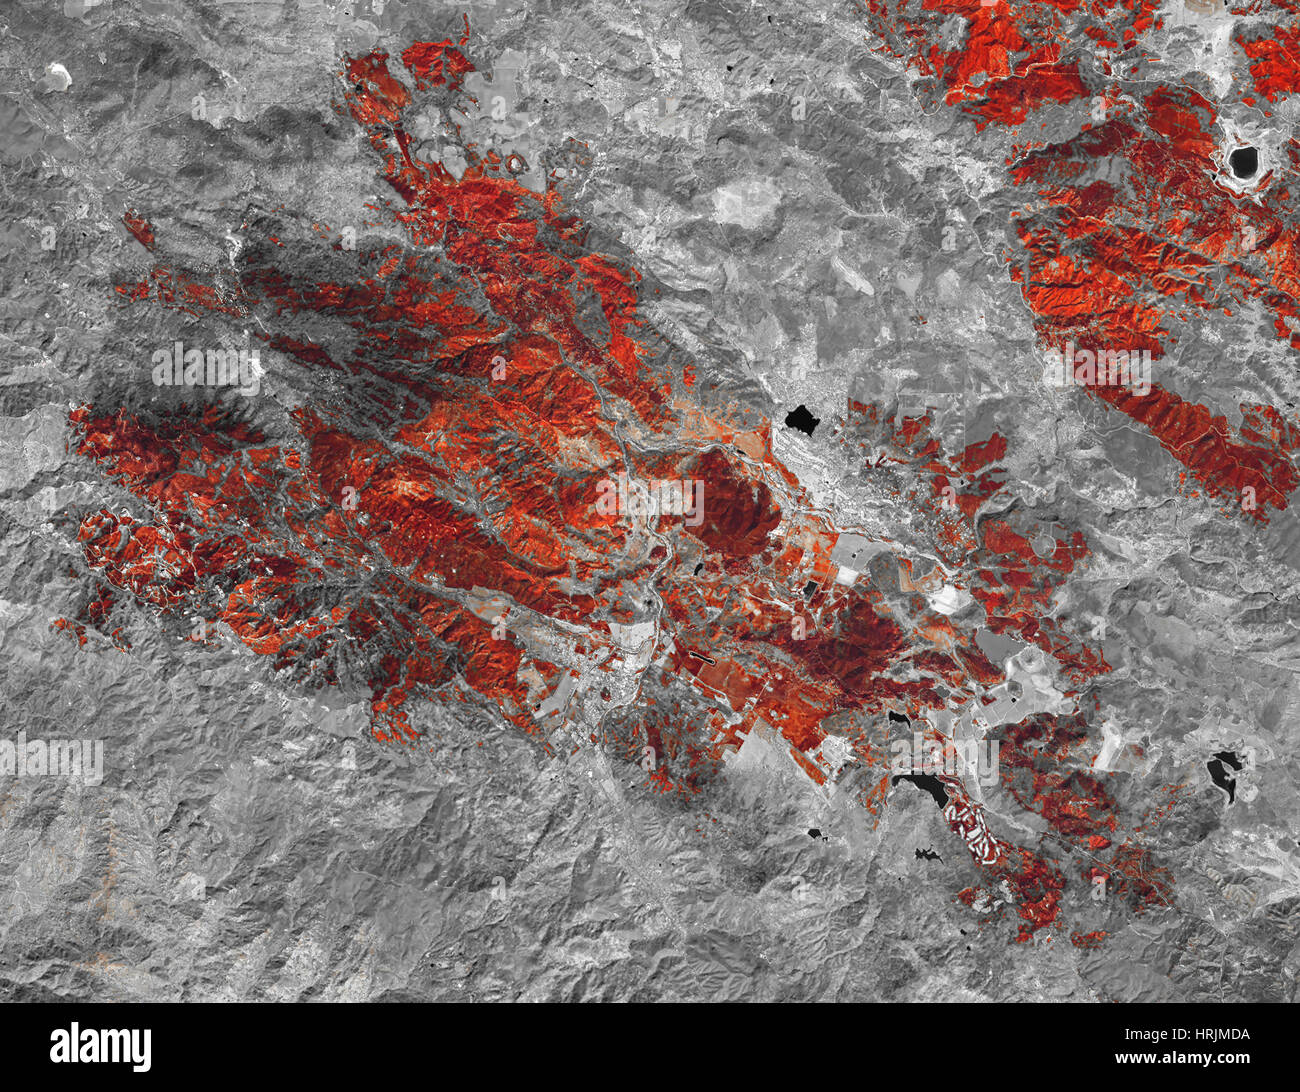 California Wildfire cicatrices, 2015 Banque D'Images